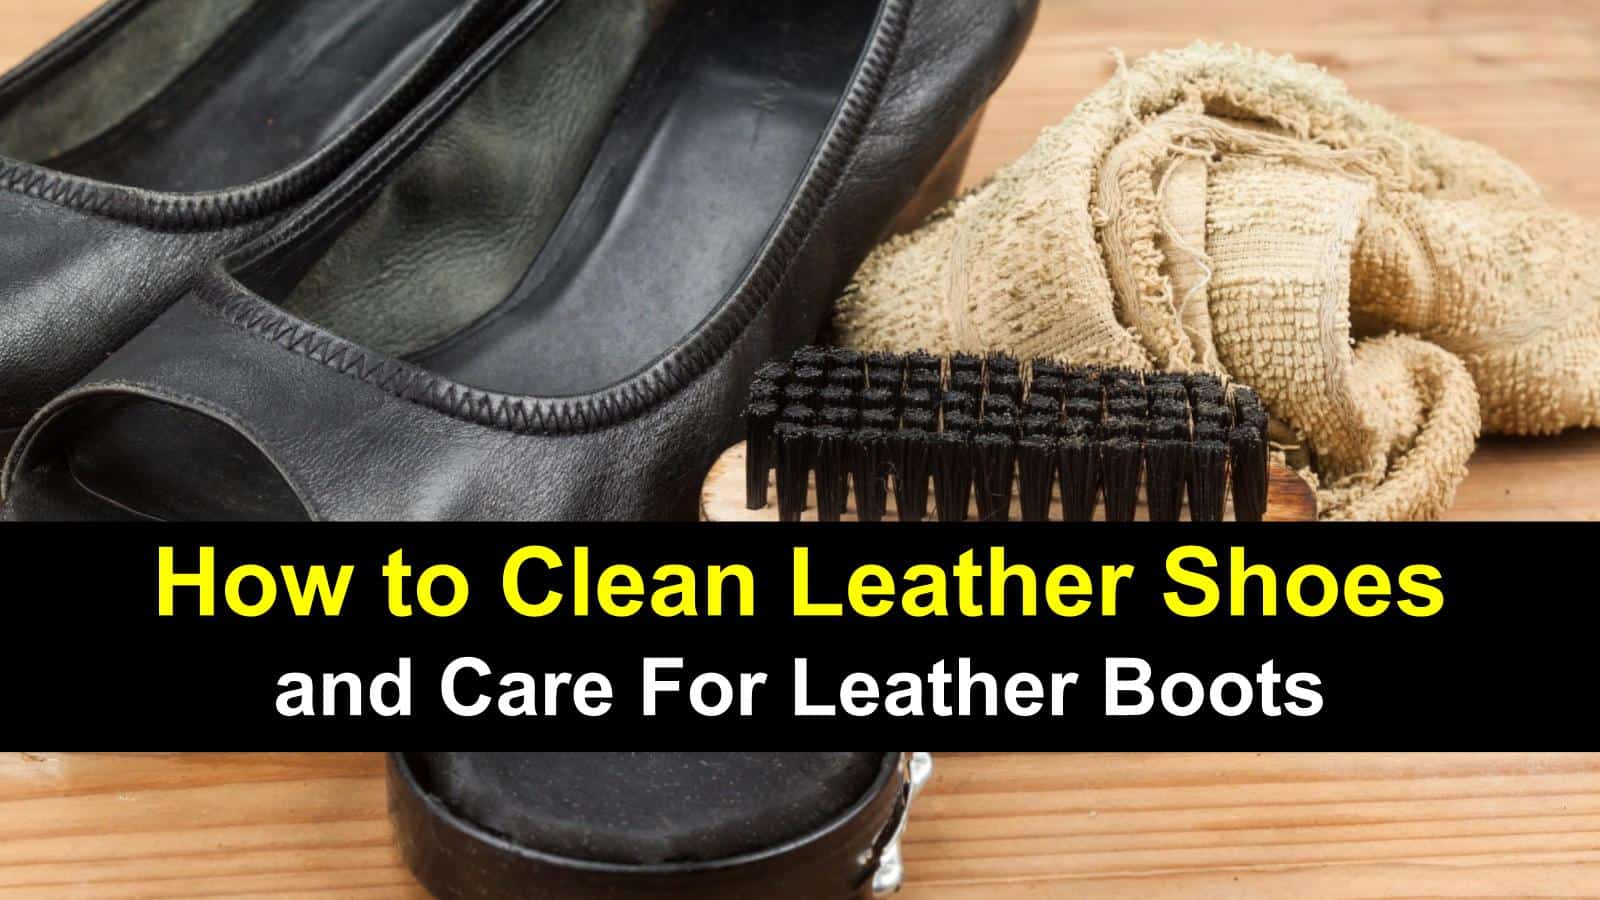 how to clean leather shoes with vinegar